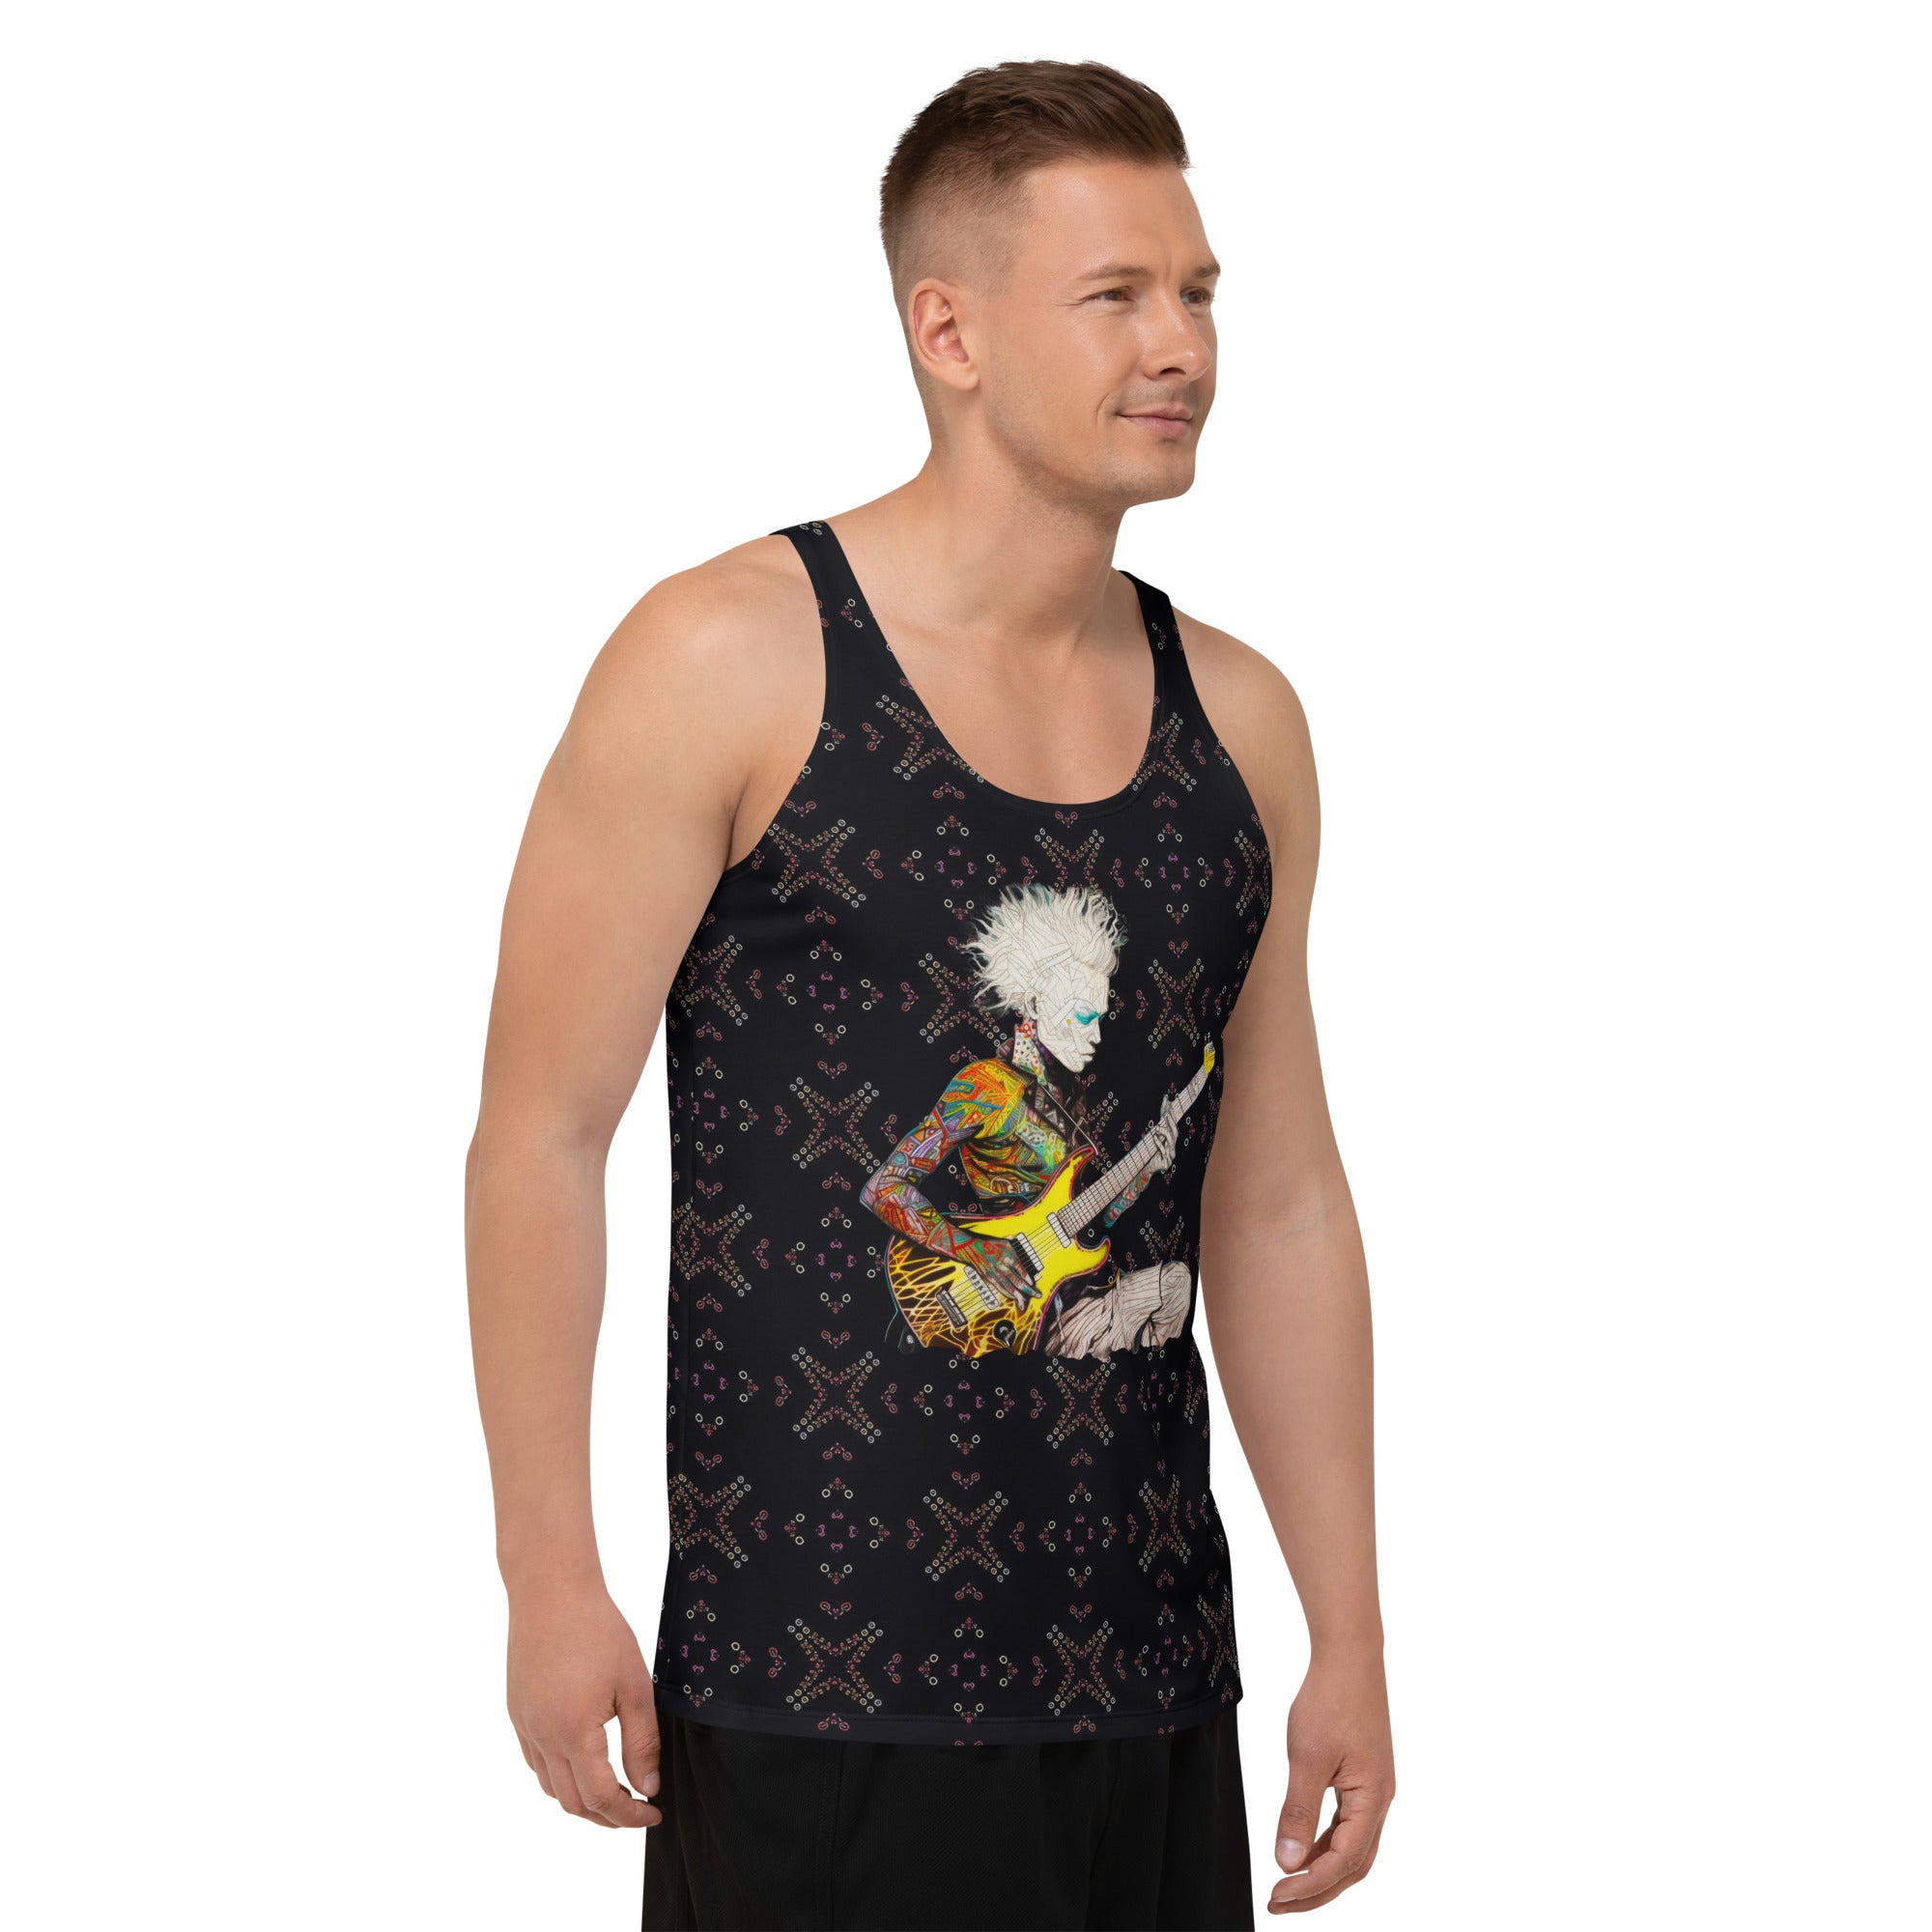 Pixel Pop Men's Tank Top styled with casual jeans for a daily look.